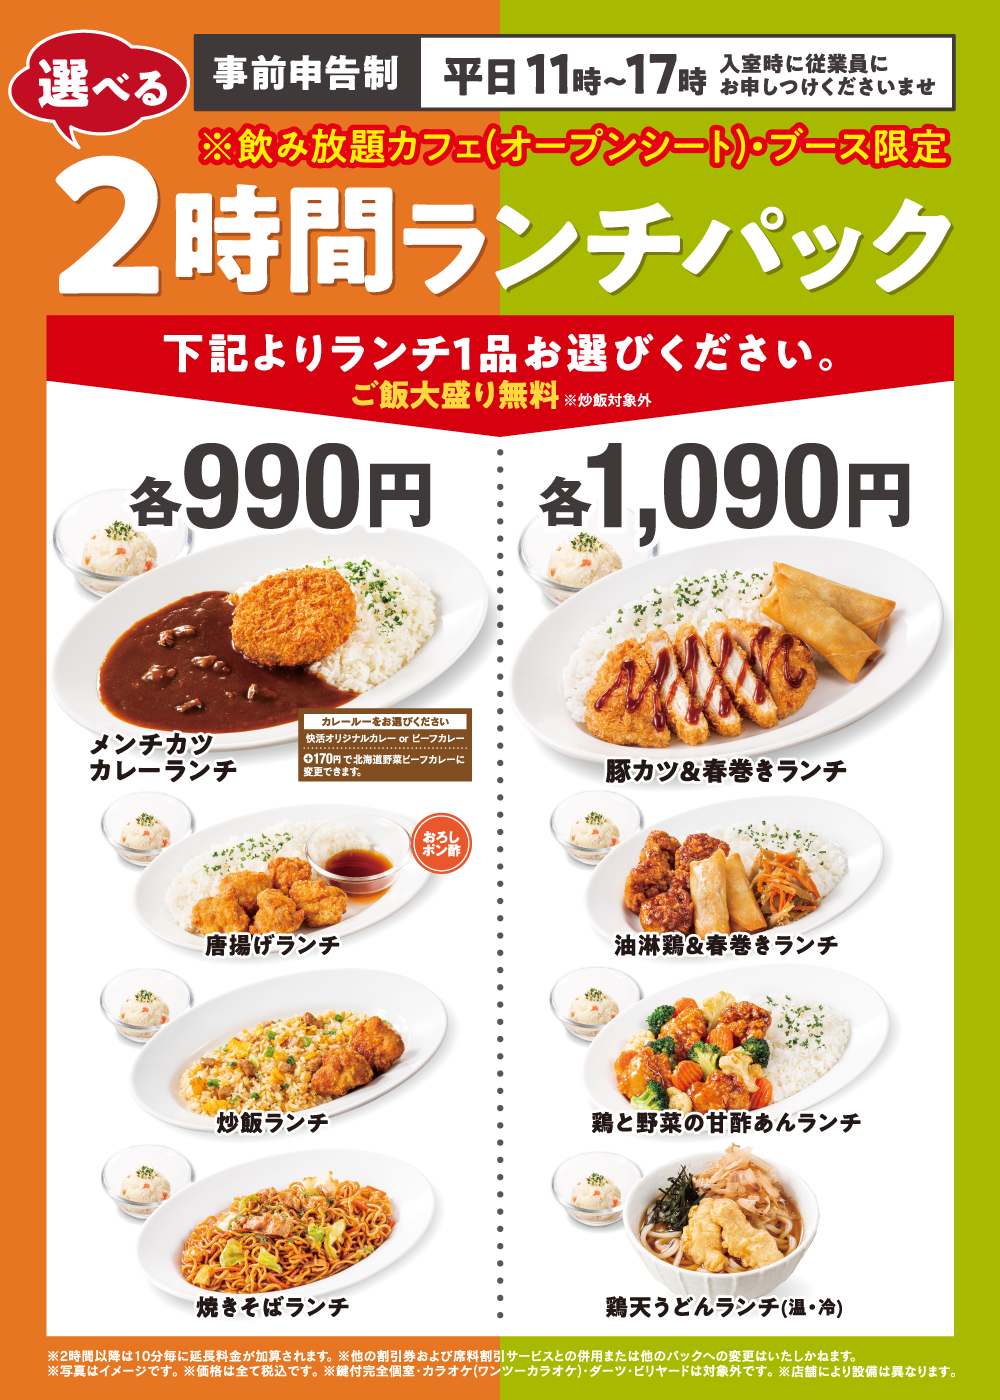 info_gm2310_lunchpack_cafe_booth_w1000.png